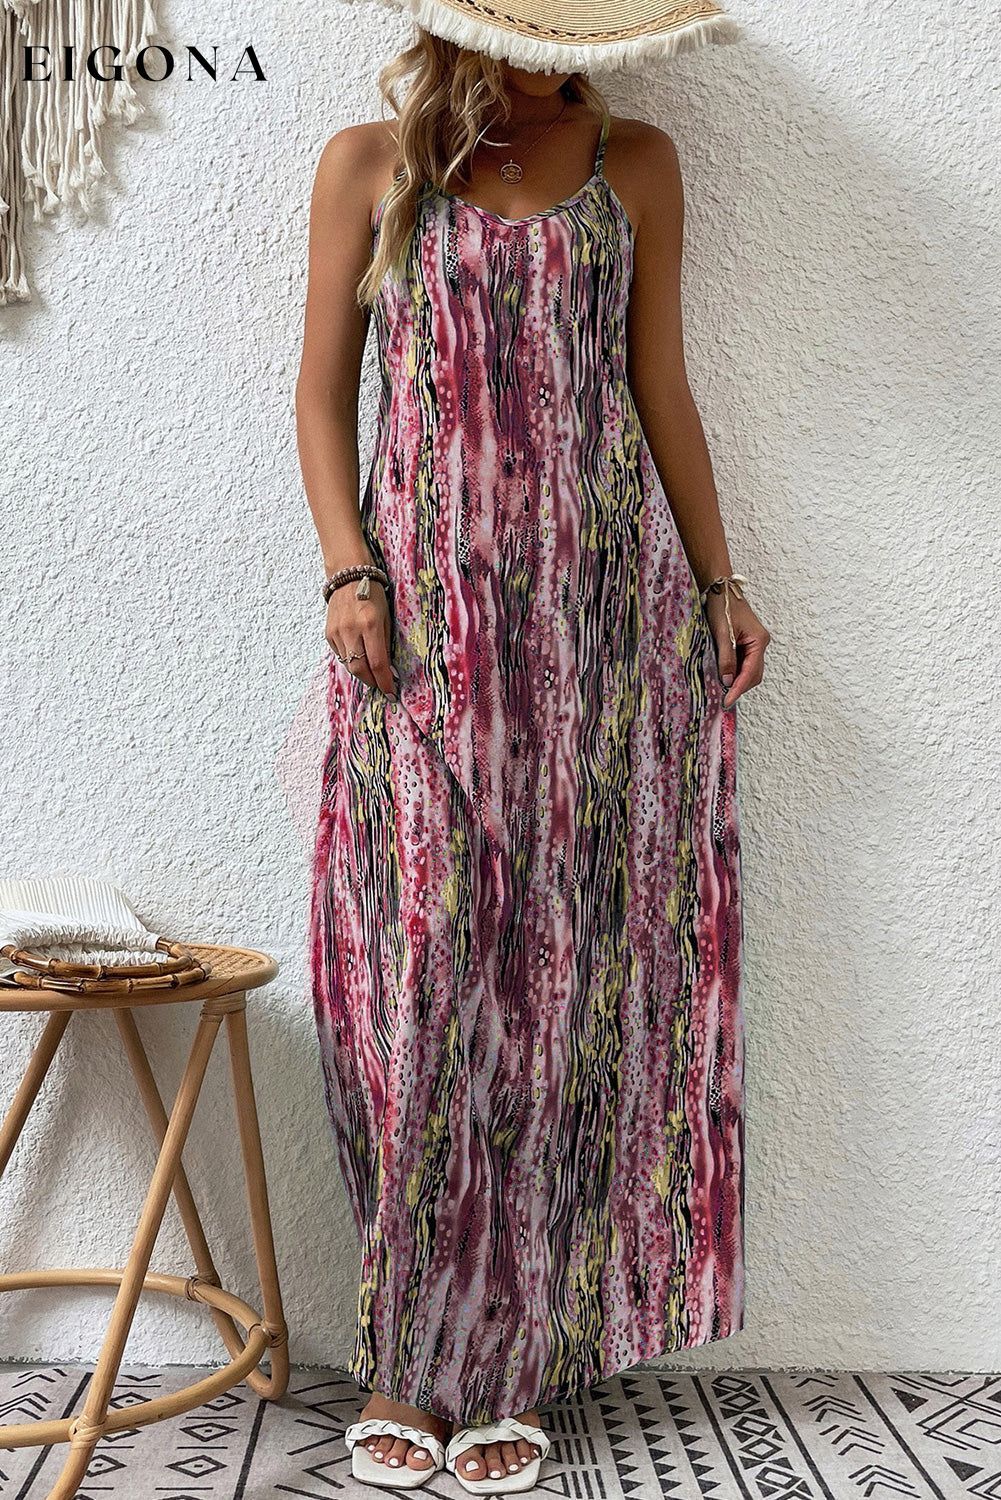 Multicolor Abstract Print Adjustable Spaghetti Strap Maxi Dress clothes dress dresses maxi dress Occasion Vacation Print Abstract Season Summer Silhouette A-Line Style Bohemian